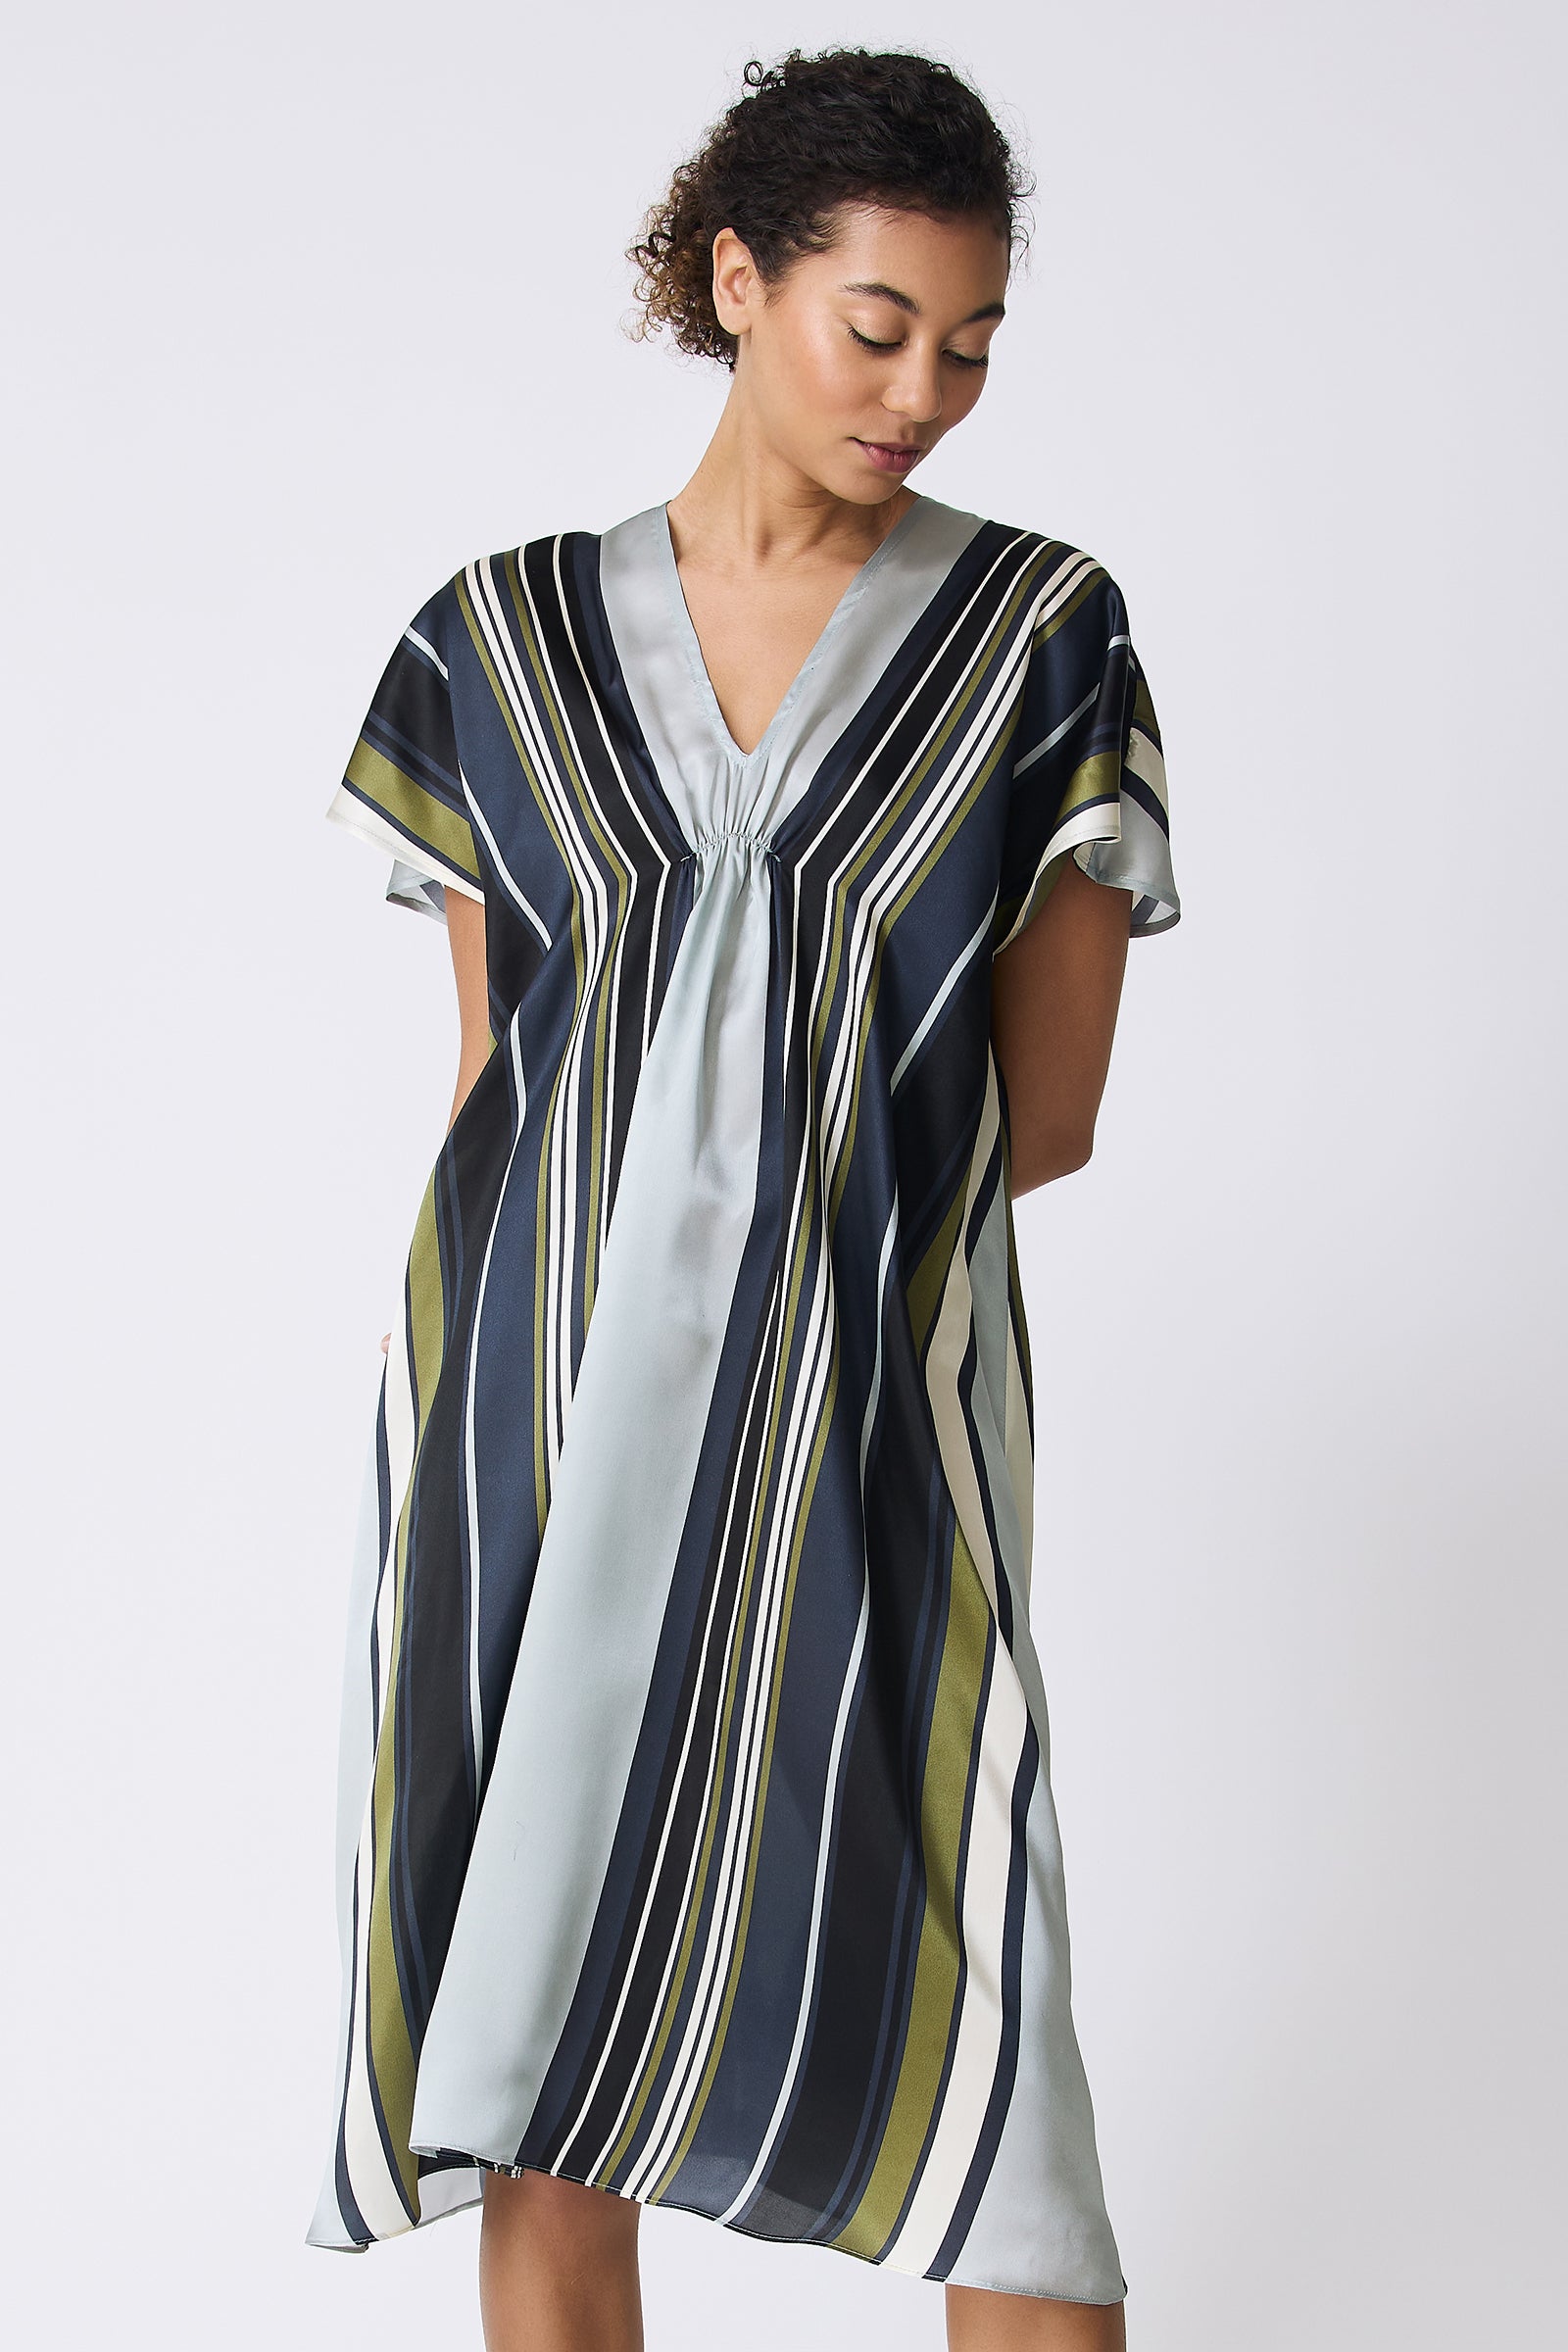 Kal Rieman Vanna Gather Front Dress in Multi Stripe on model looking down front view